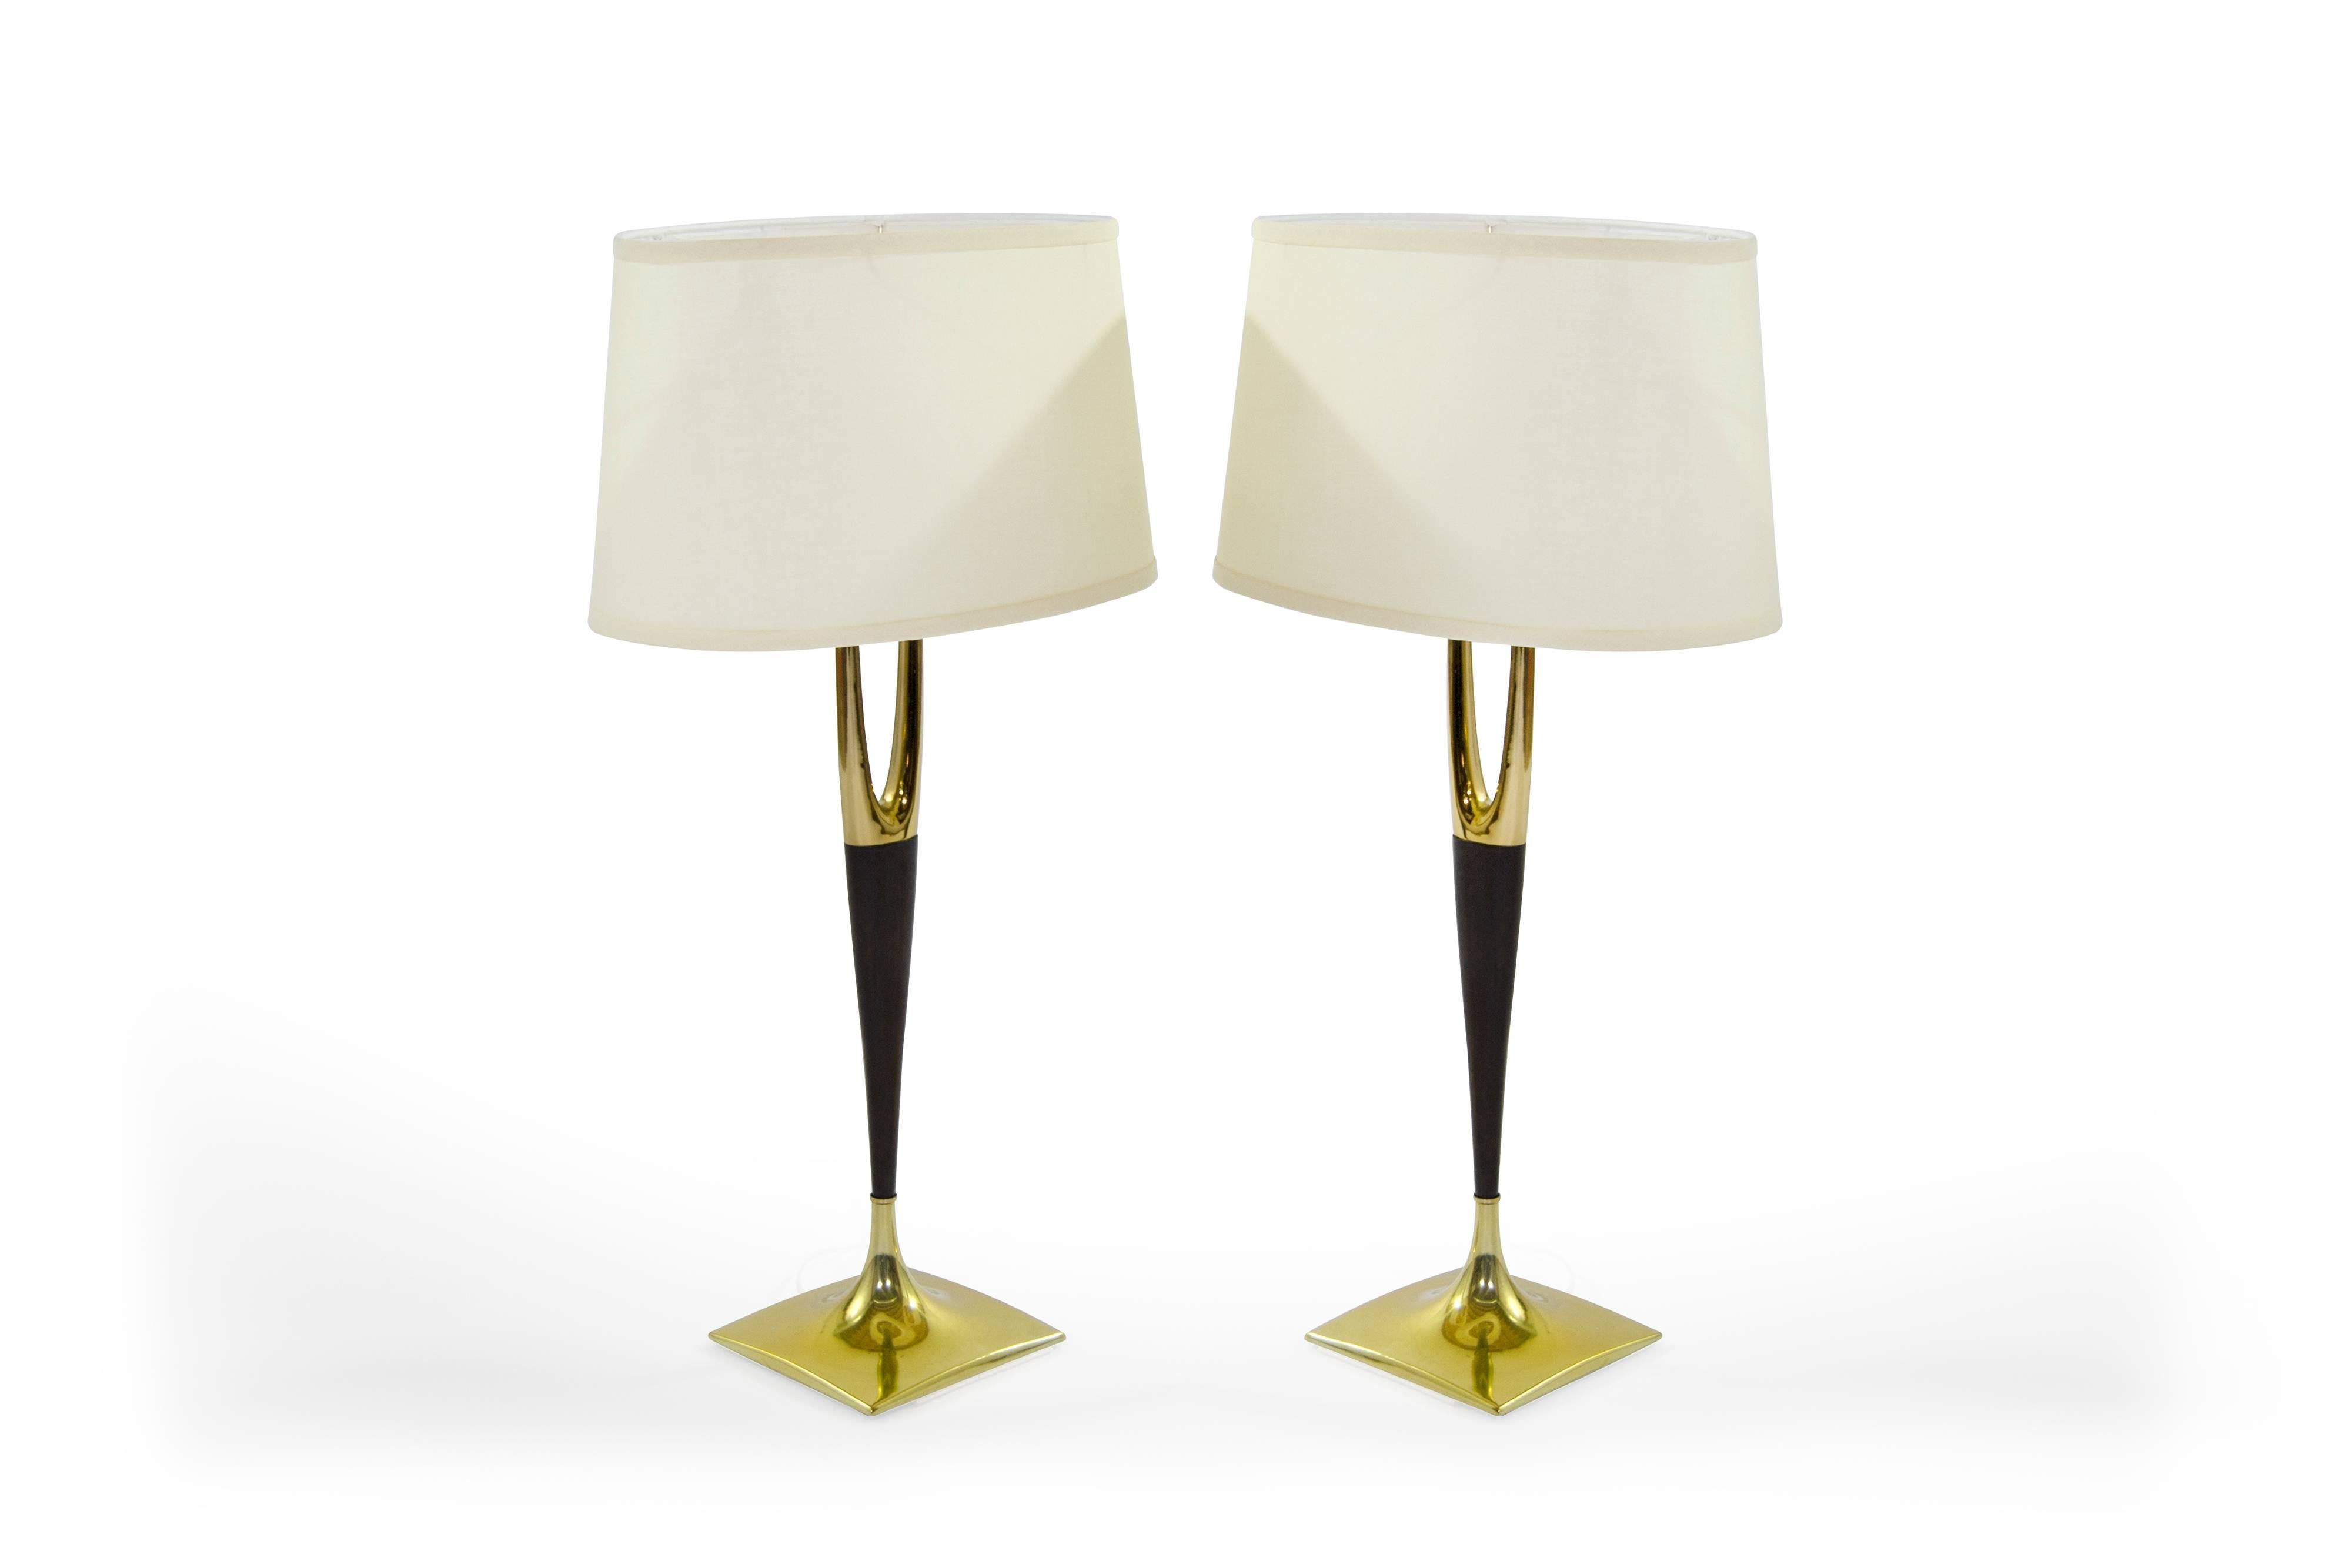 Fully restored pair of brass and walnut table lamps by Laurel Lamp Company, circa 1950s.

Brass and walnut have been fully restored. Newly rewired as well as fitted with new UL listed sockets.